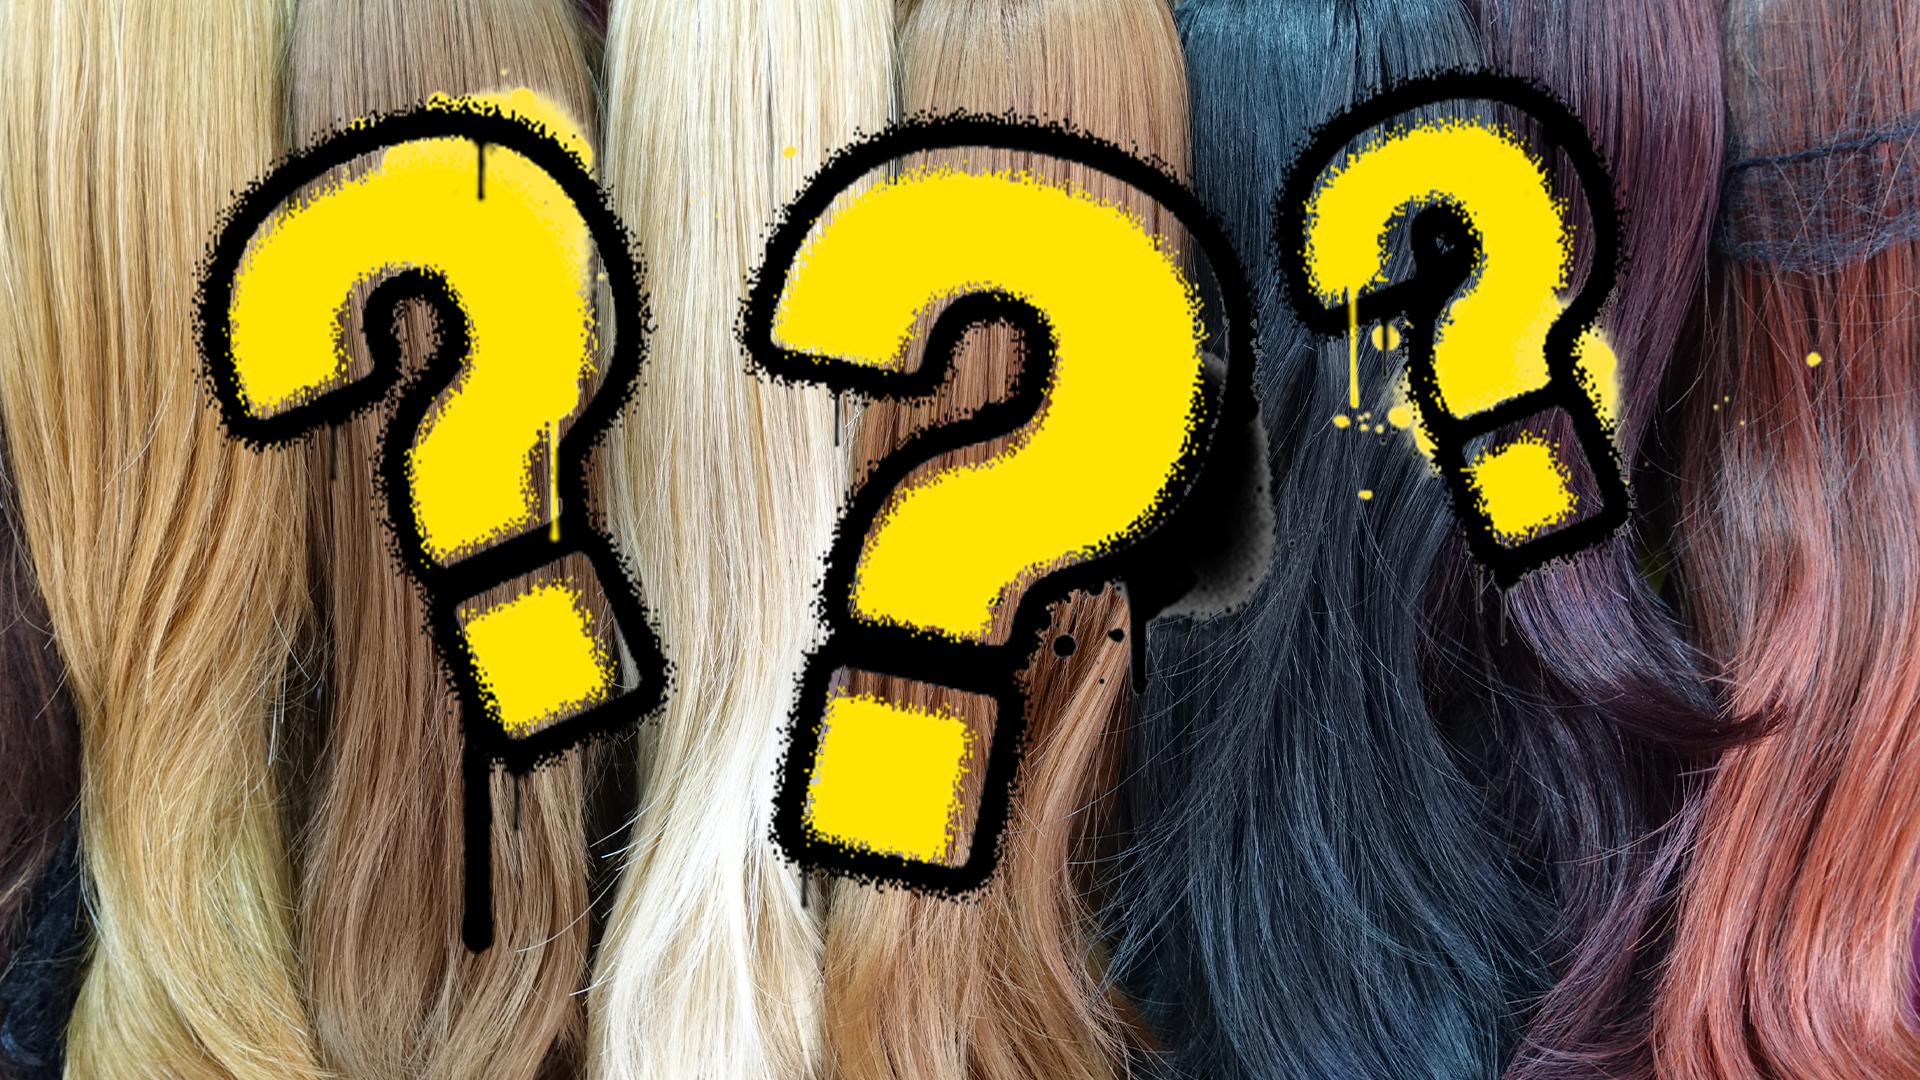 Wigs and question marks